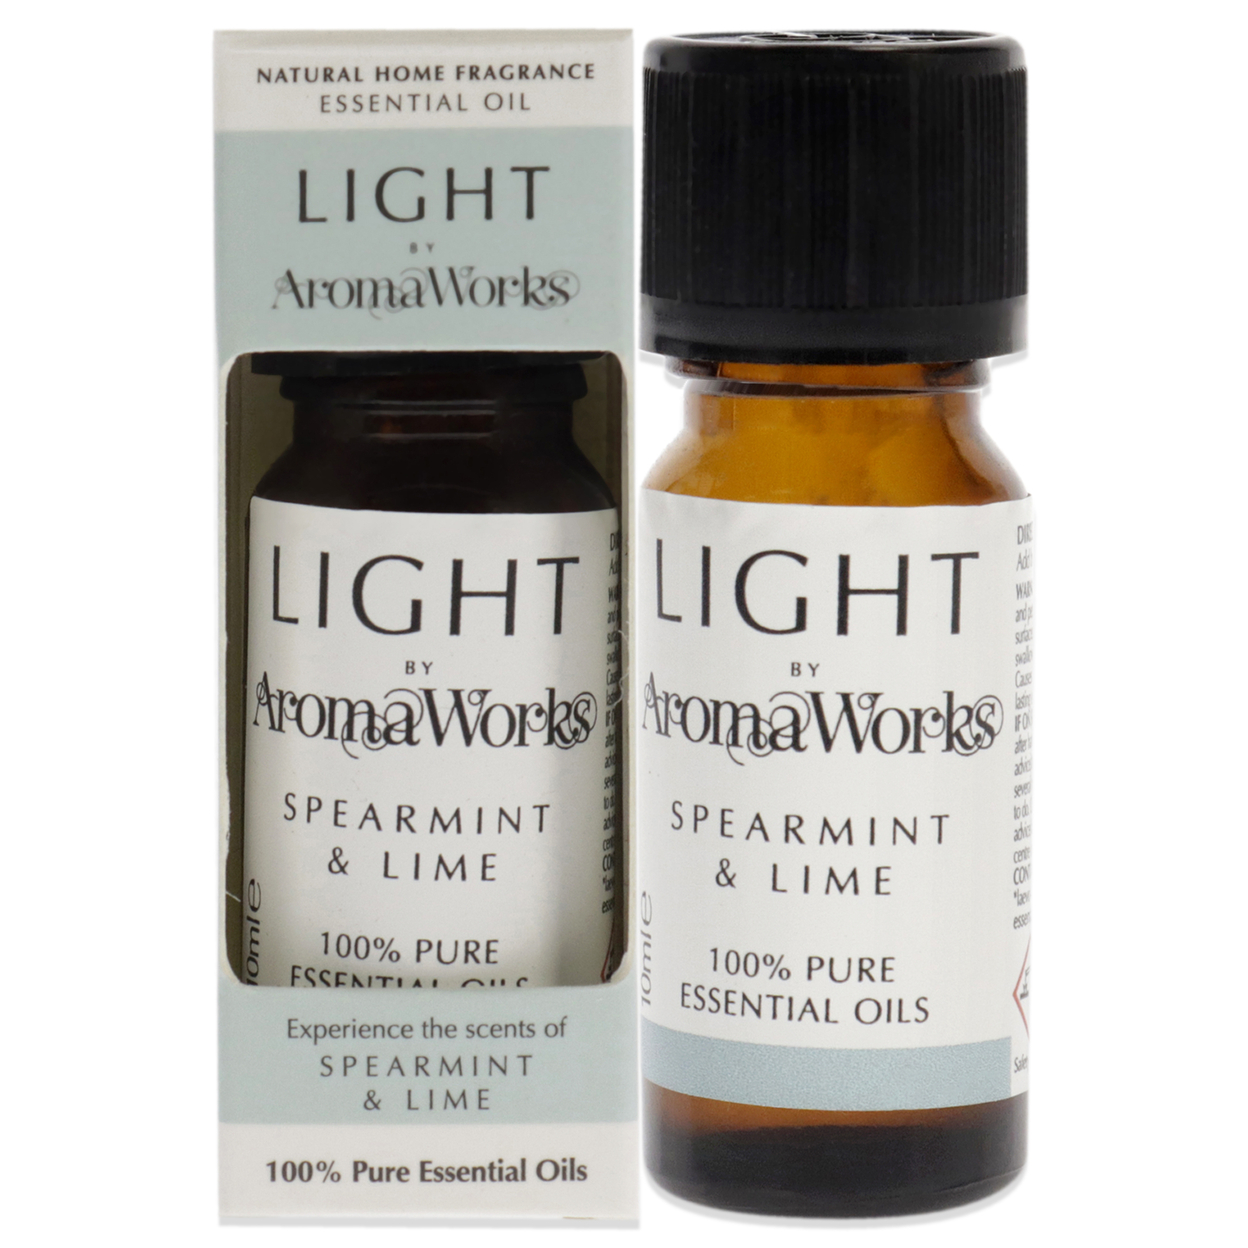 Aromaworks Light Essential Oil - Spearmint And Lime 0.35 Oz